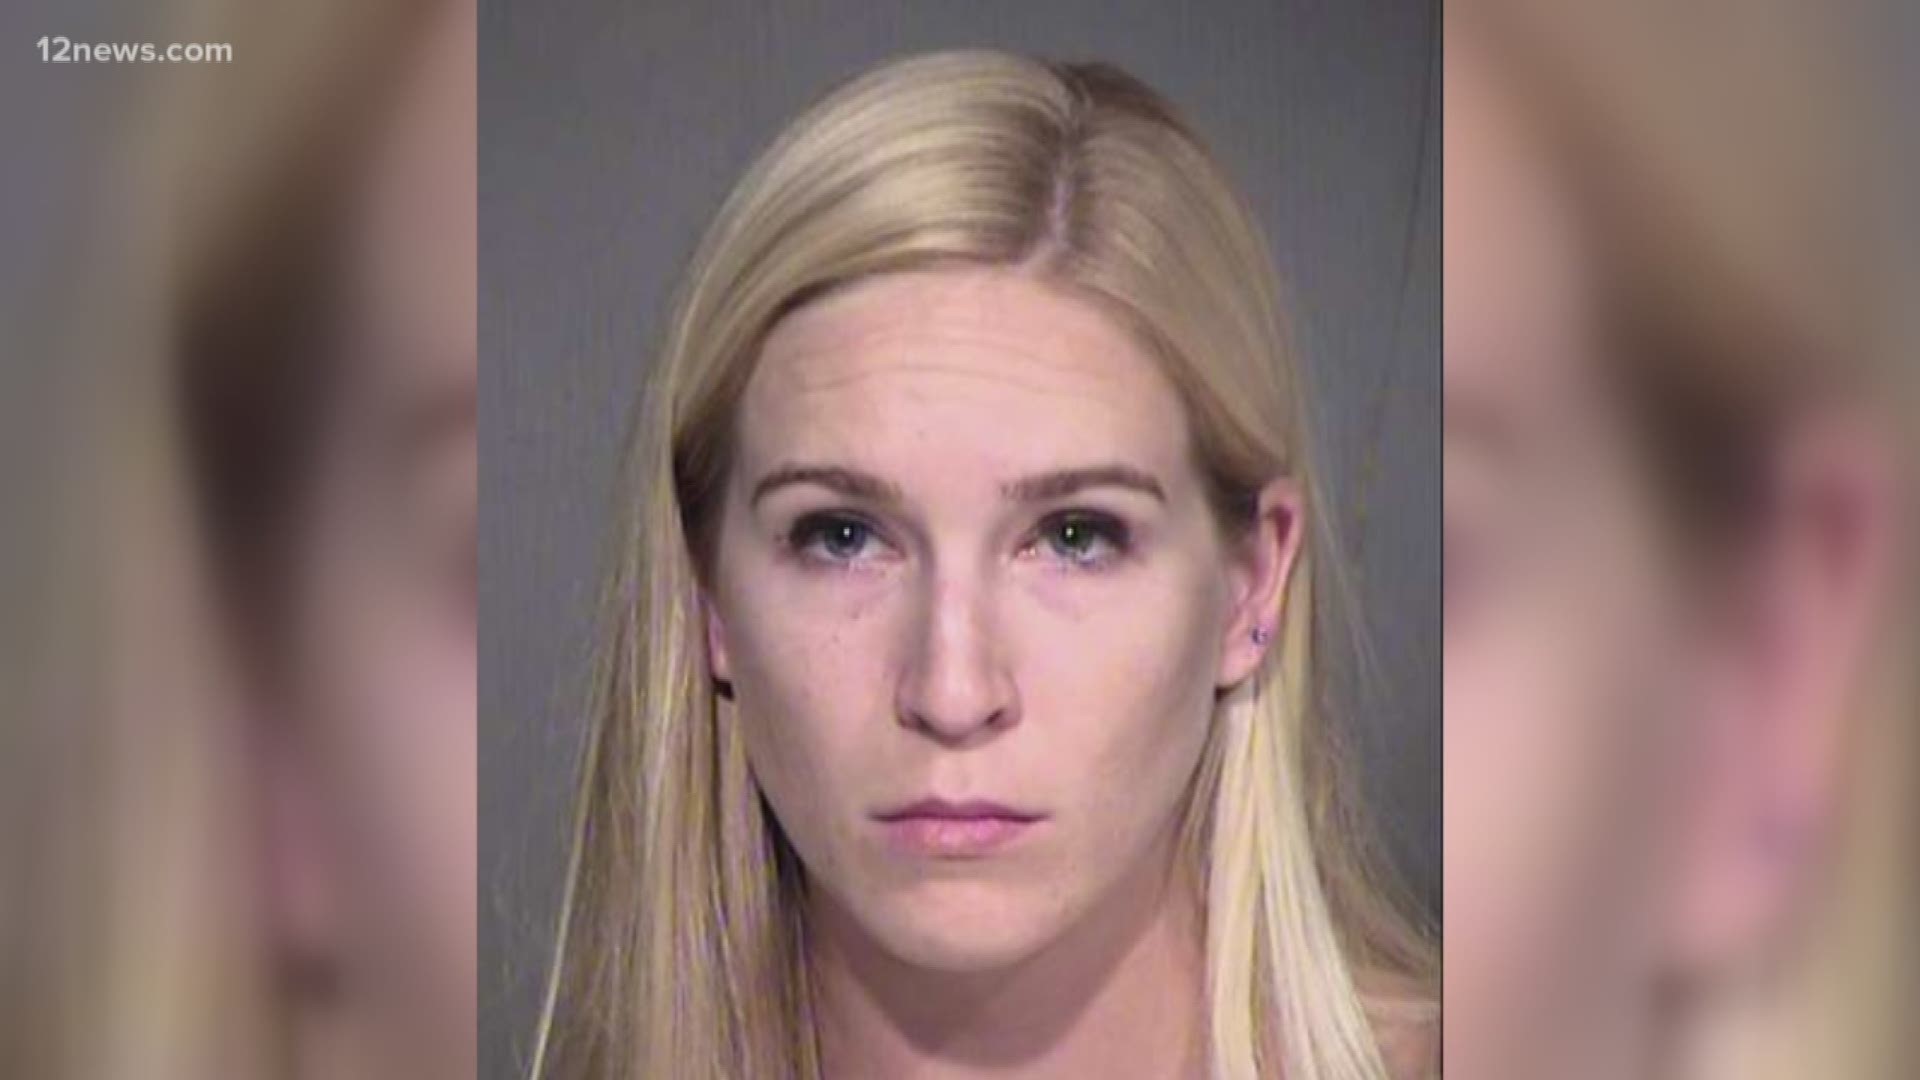 Keri Harwood was arrested last August for filming herself sexually molesting her two children and selling the videos online. She accepted a plea deal today.